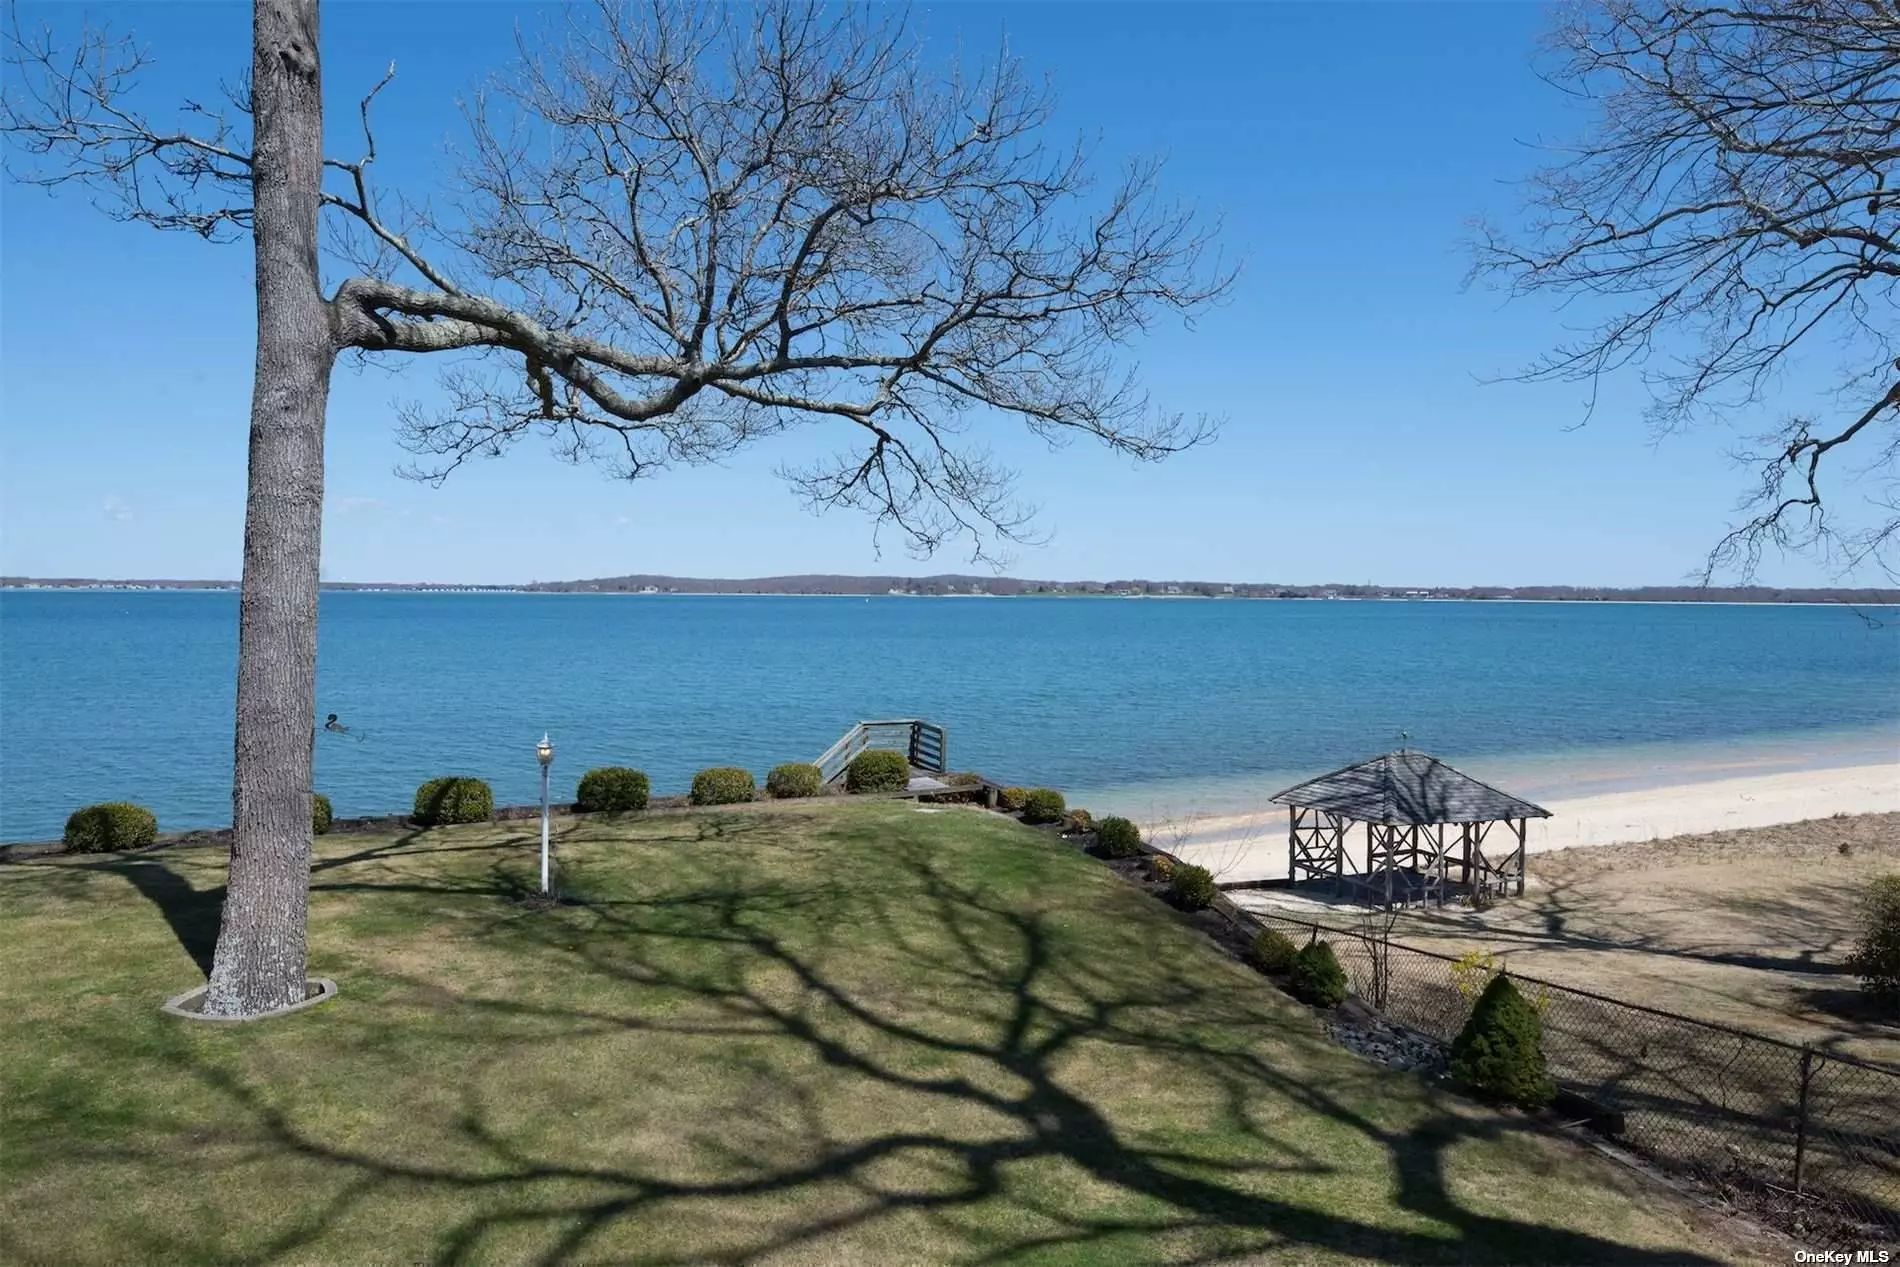 Rare opportunity to own a perfect North Fork bay front home in the highly sought after Reydon Shores community featuring your own private sandy beach. This amazing move in condition home offers breathtaking panoramic views of Shelter Island with 3 levels, 2 wood burning fireplaces, a great room, sunroom, loft , 6 bedrooms,  3 1/2 baths and a huge Trex deck for entertaining. In addition there is a separate 2 story/2 car garage with water and electric, manicured landscaping, Slate Roof and CAC. The lower level of the home is on grade level leading directly to the back yard offering a waterfront office,  entertainment room with fireplace, laundry room and separate storage rooms. Property is located outside of the Flood Zone. Association dues $350/year, Marina fee is $20/foot.